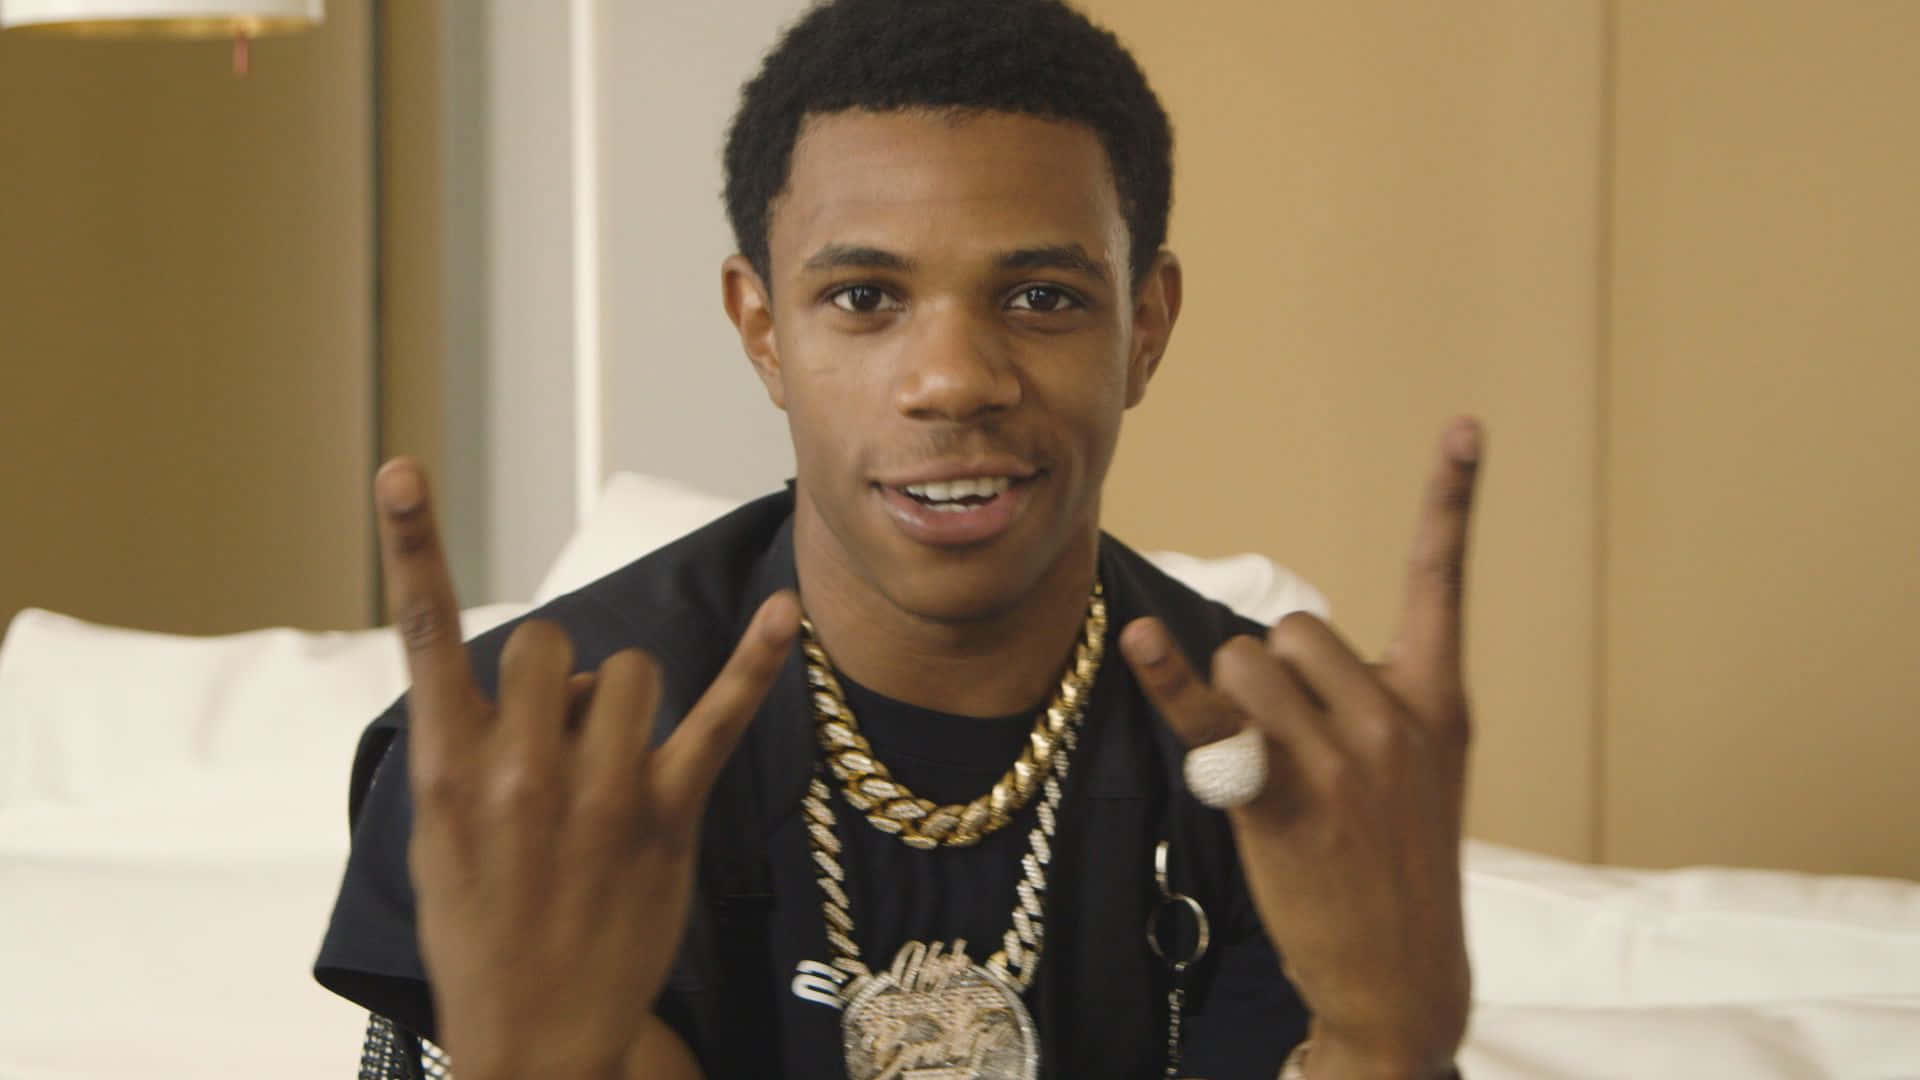 A Boogie Wit Da Hoodie captures his dramatic style on stage Wallpaper